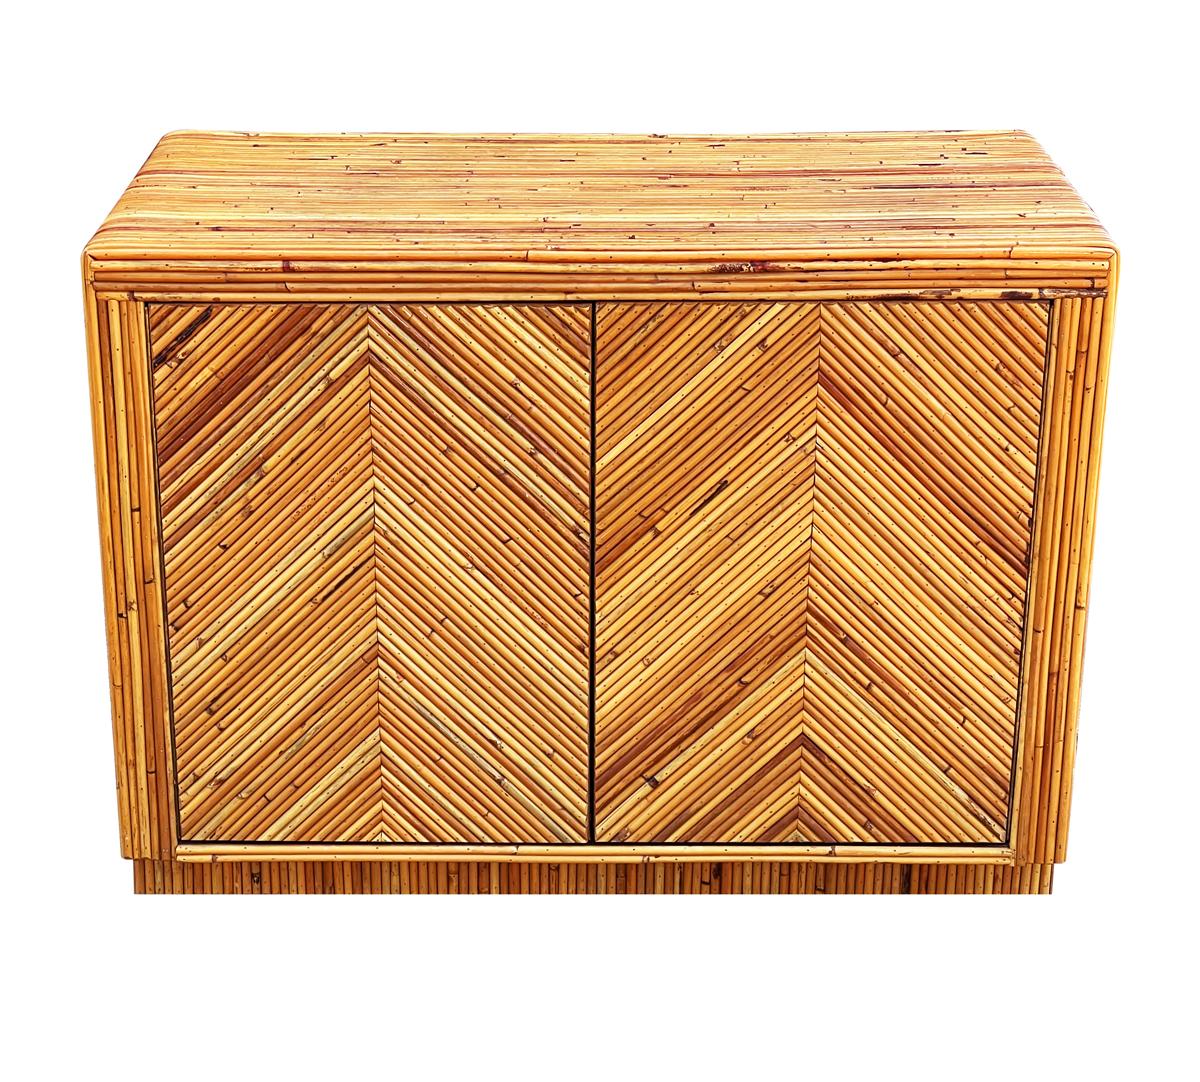 American Mid-Century Modern Pencil Reed Bamboo Sideboard or Cabinet in Chevron Pattern